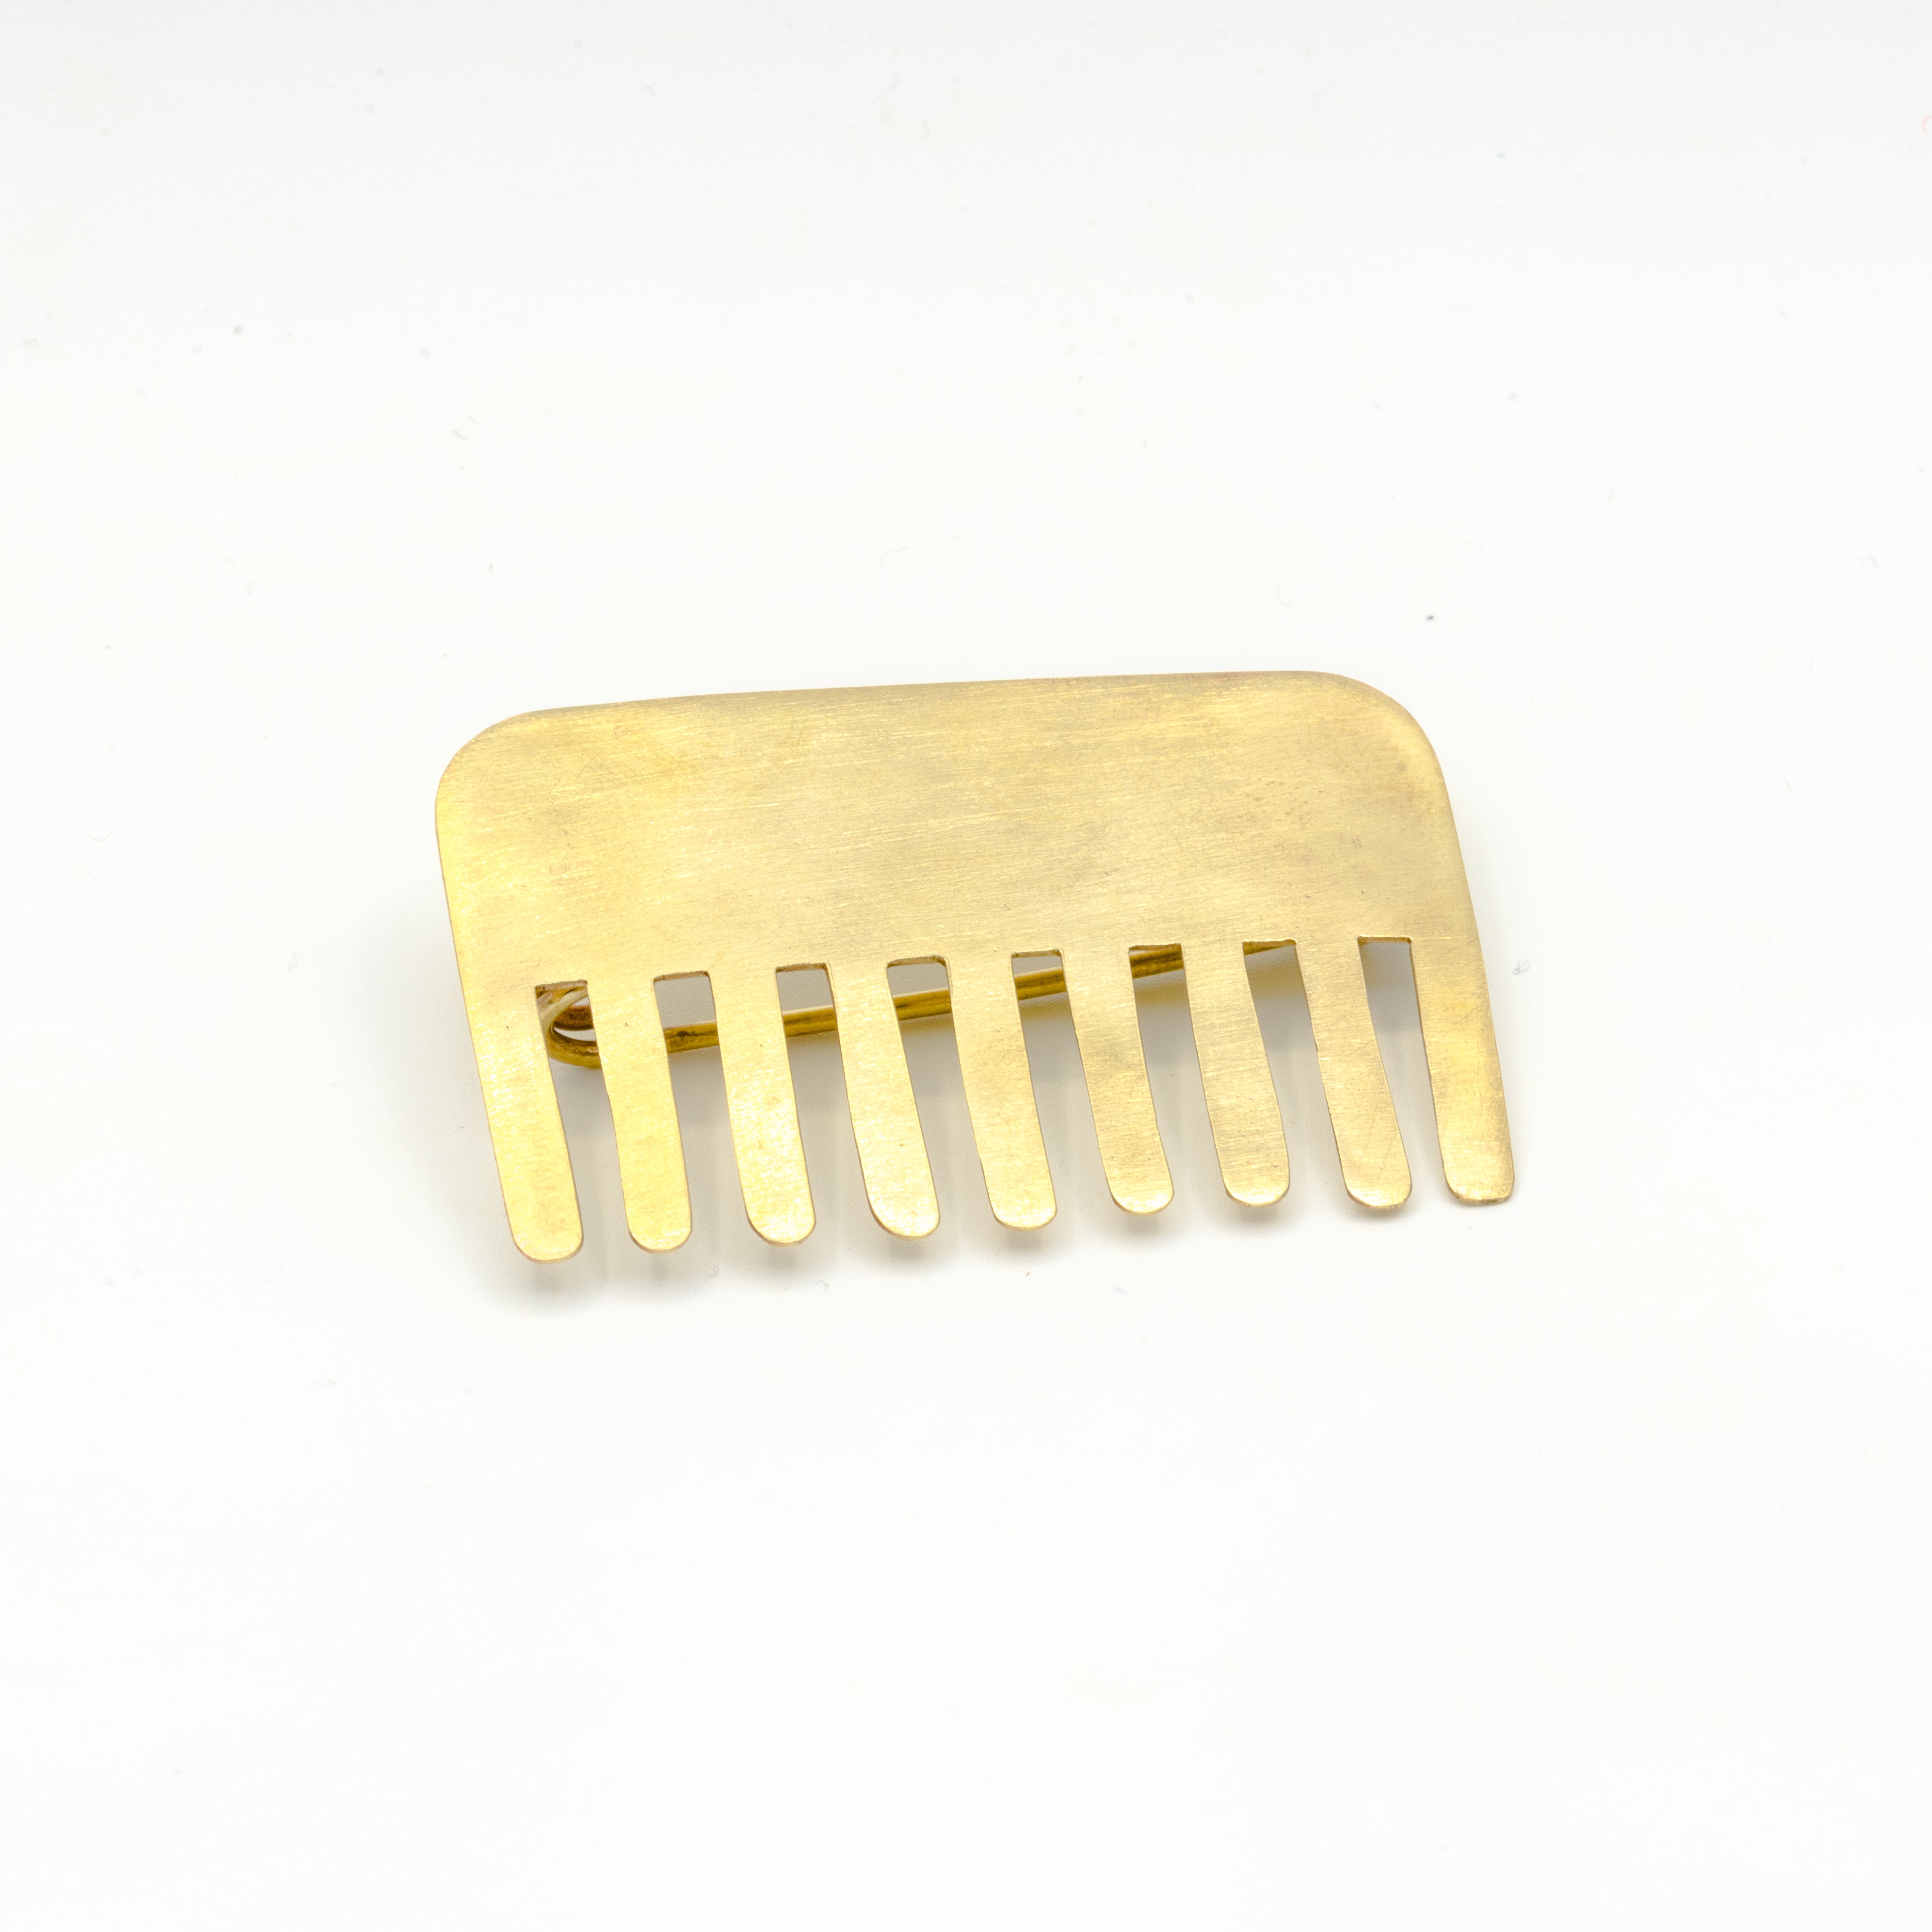 brass comb shaped pin on white background